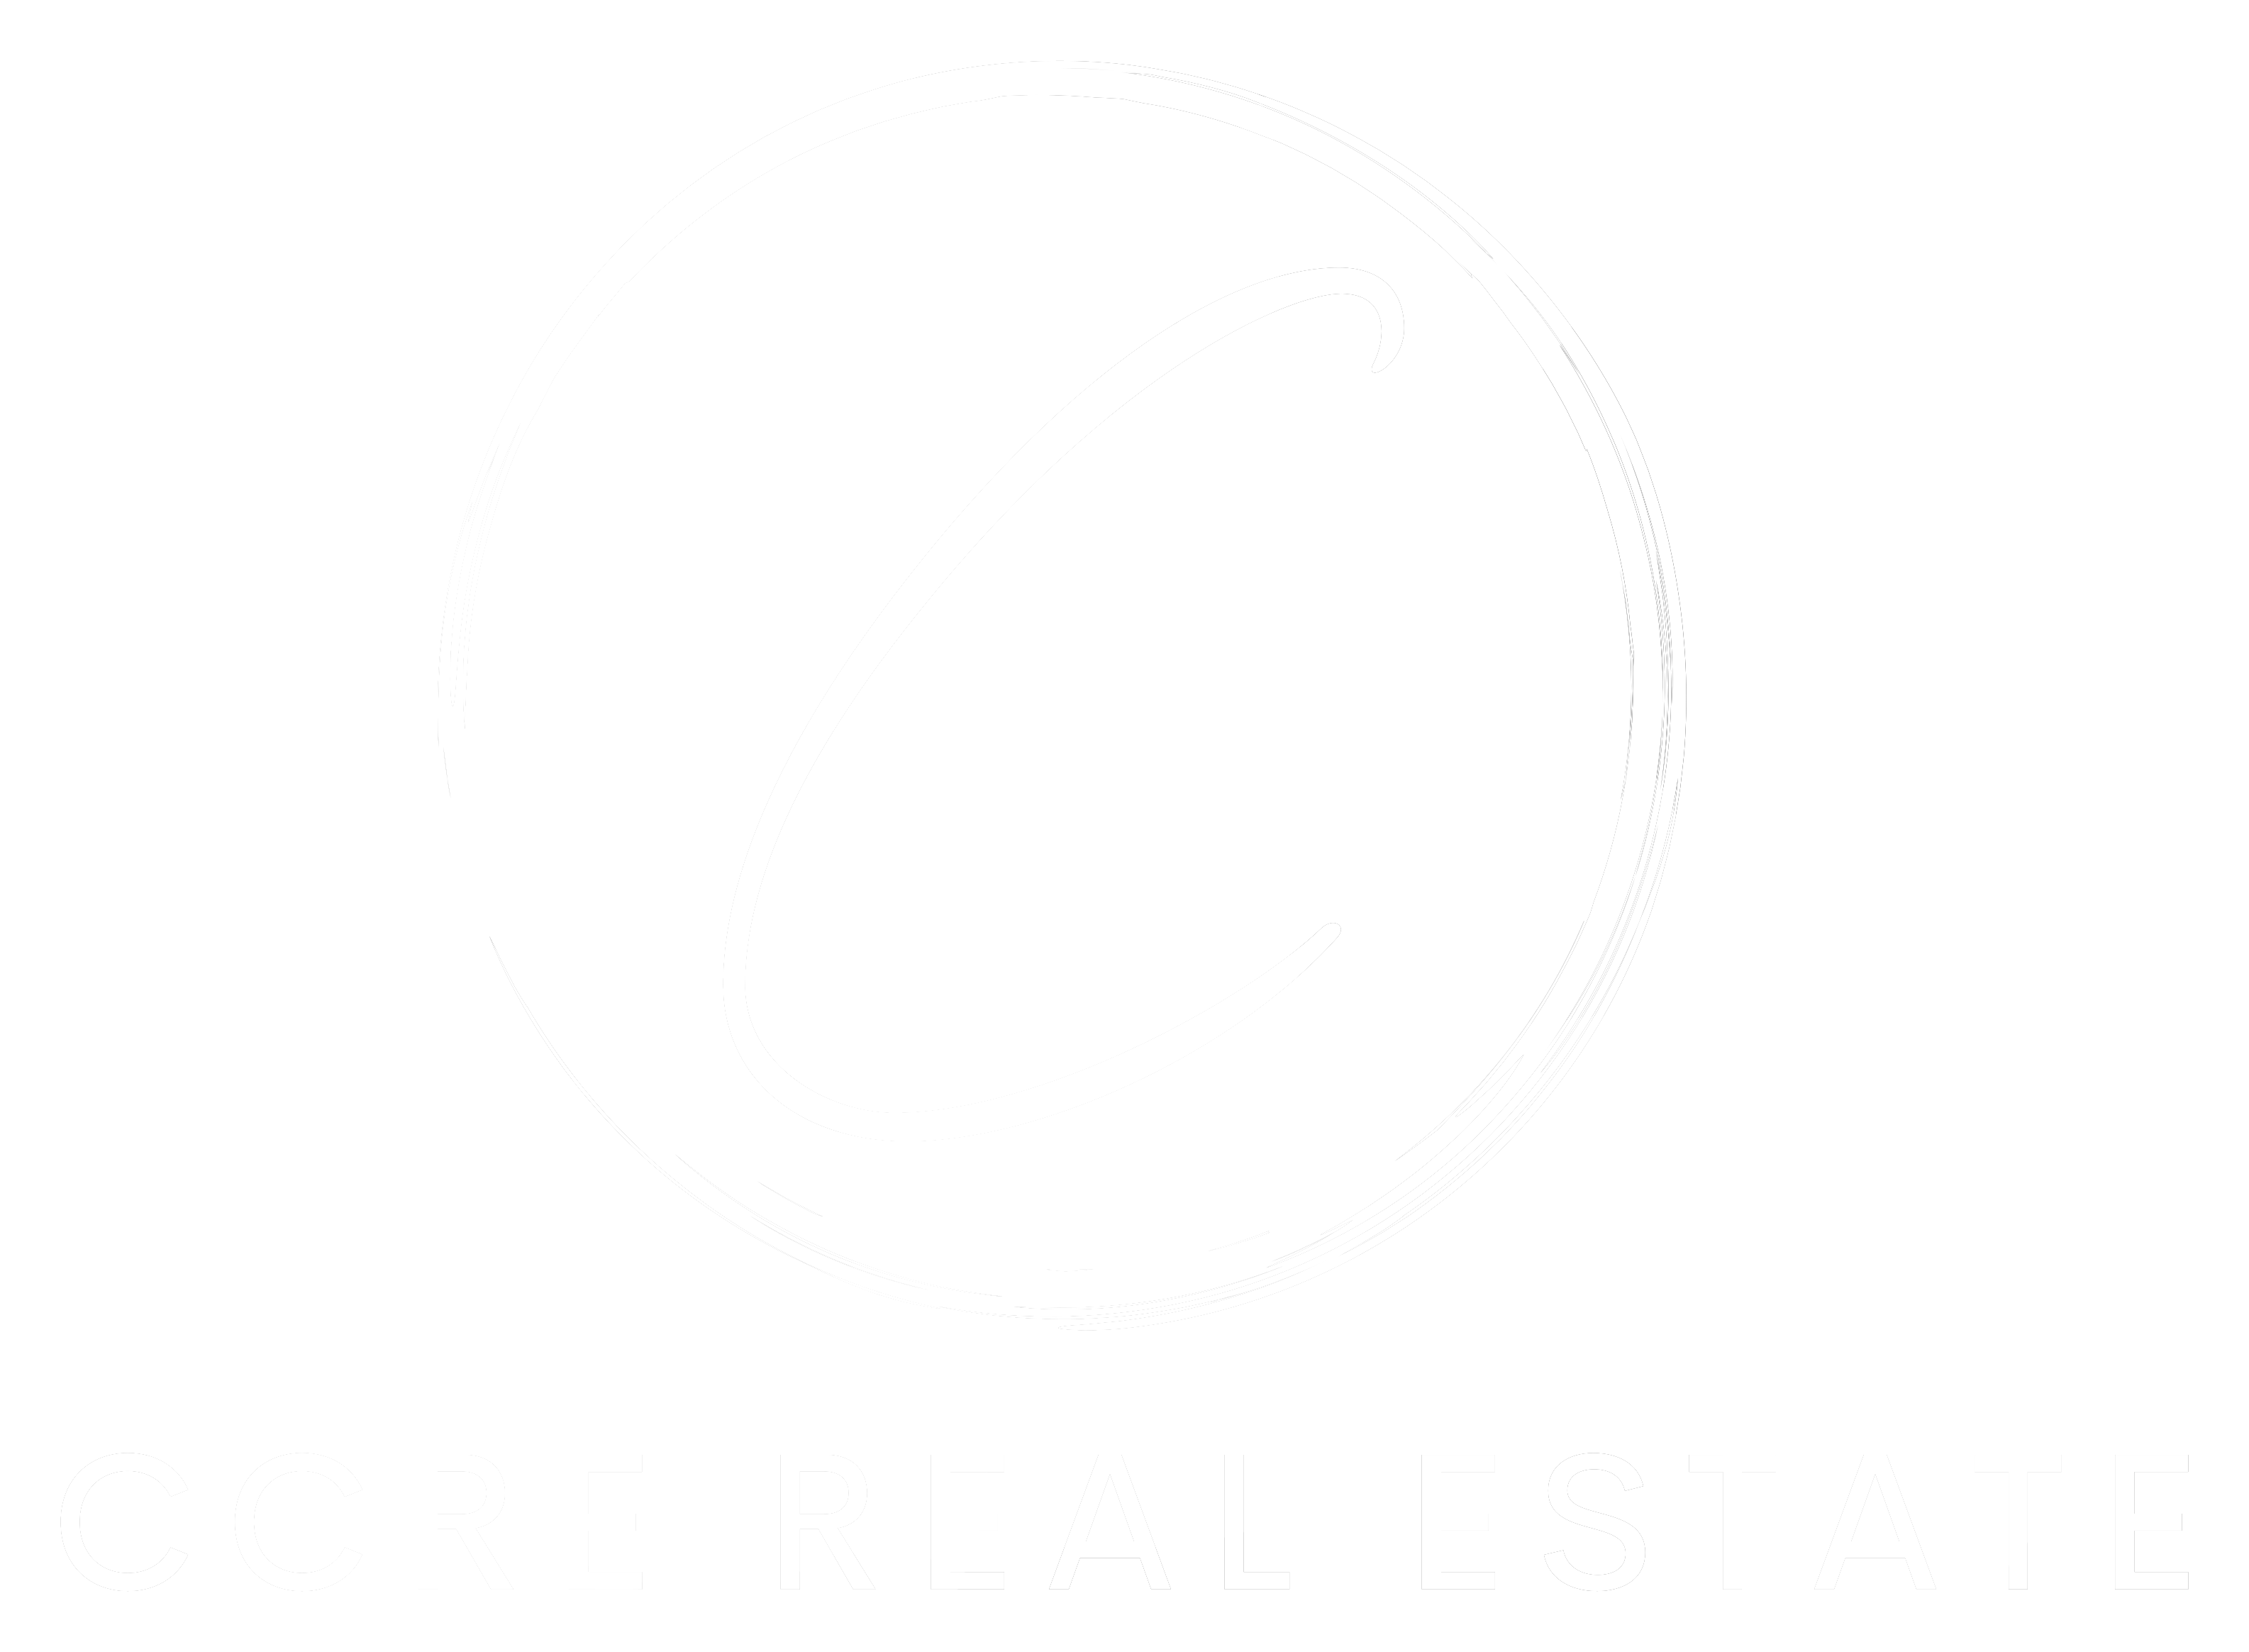 CCRE Real Estate